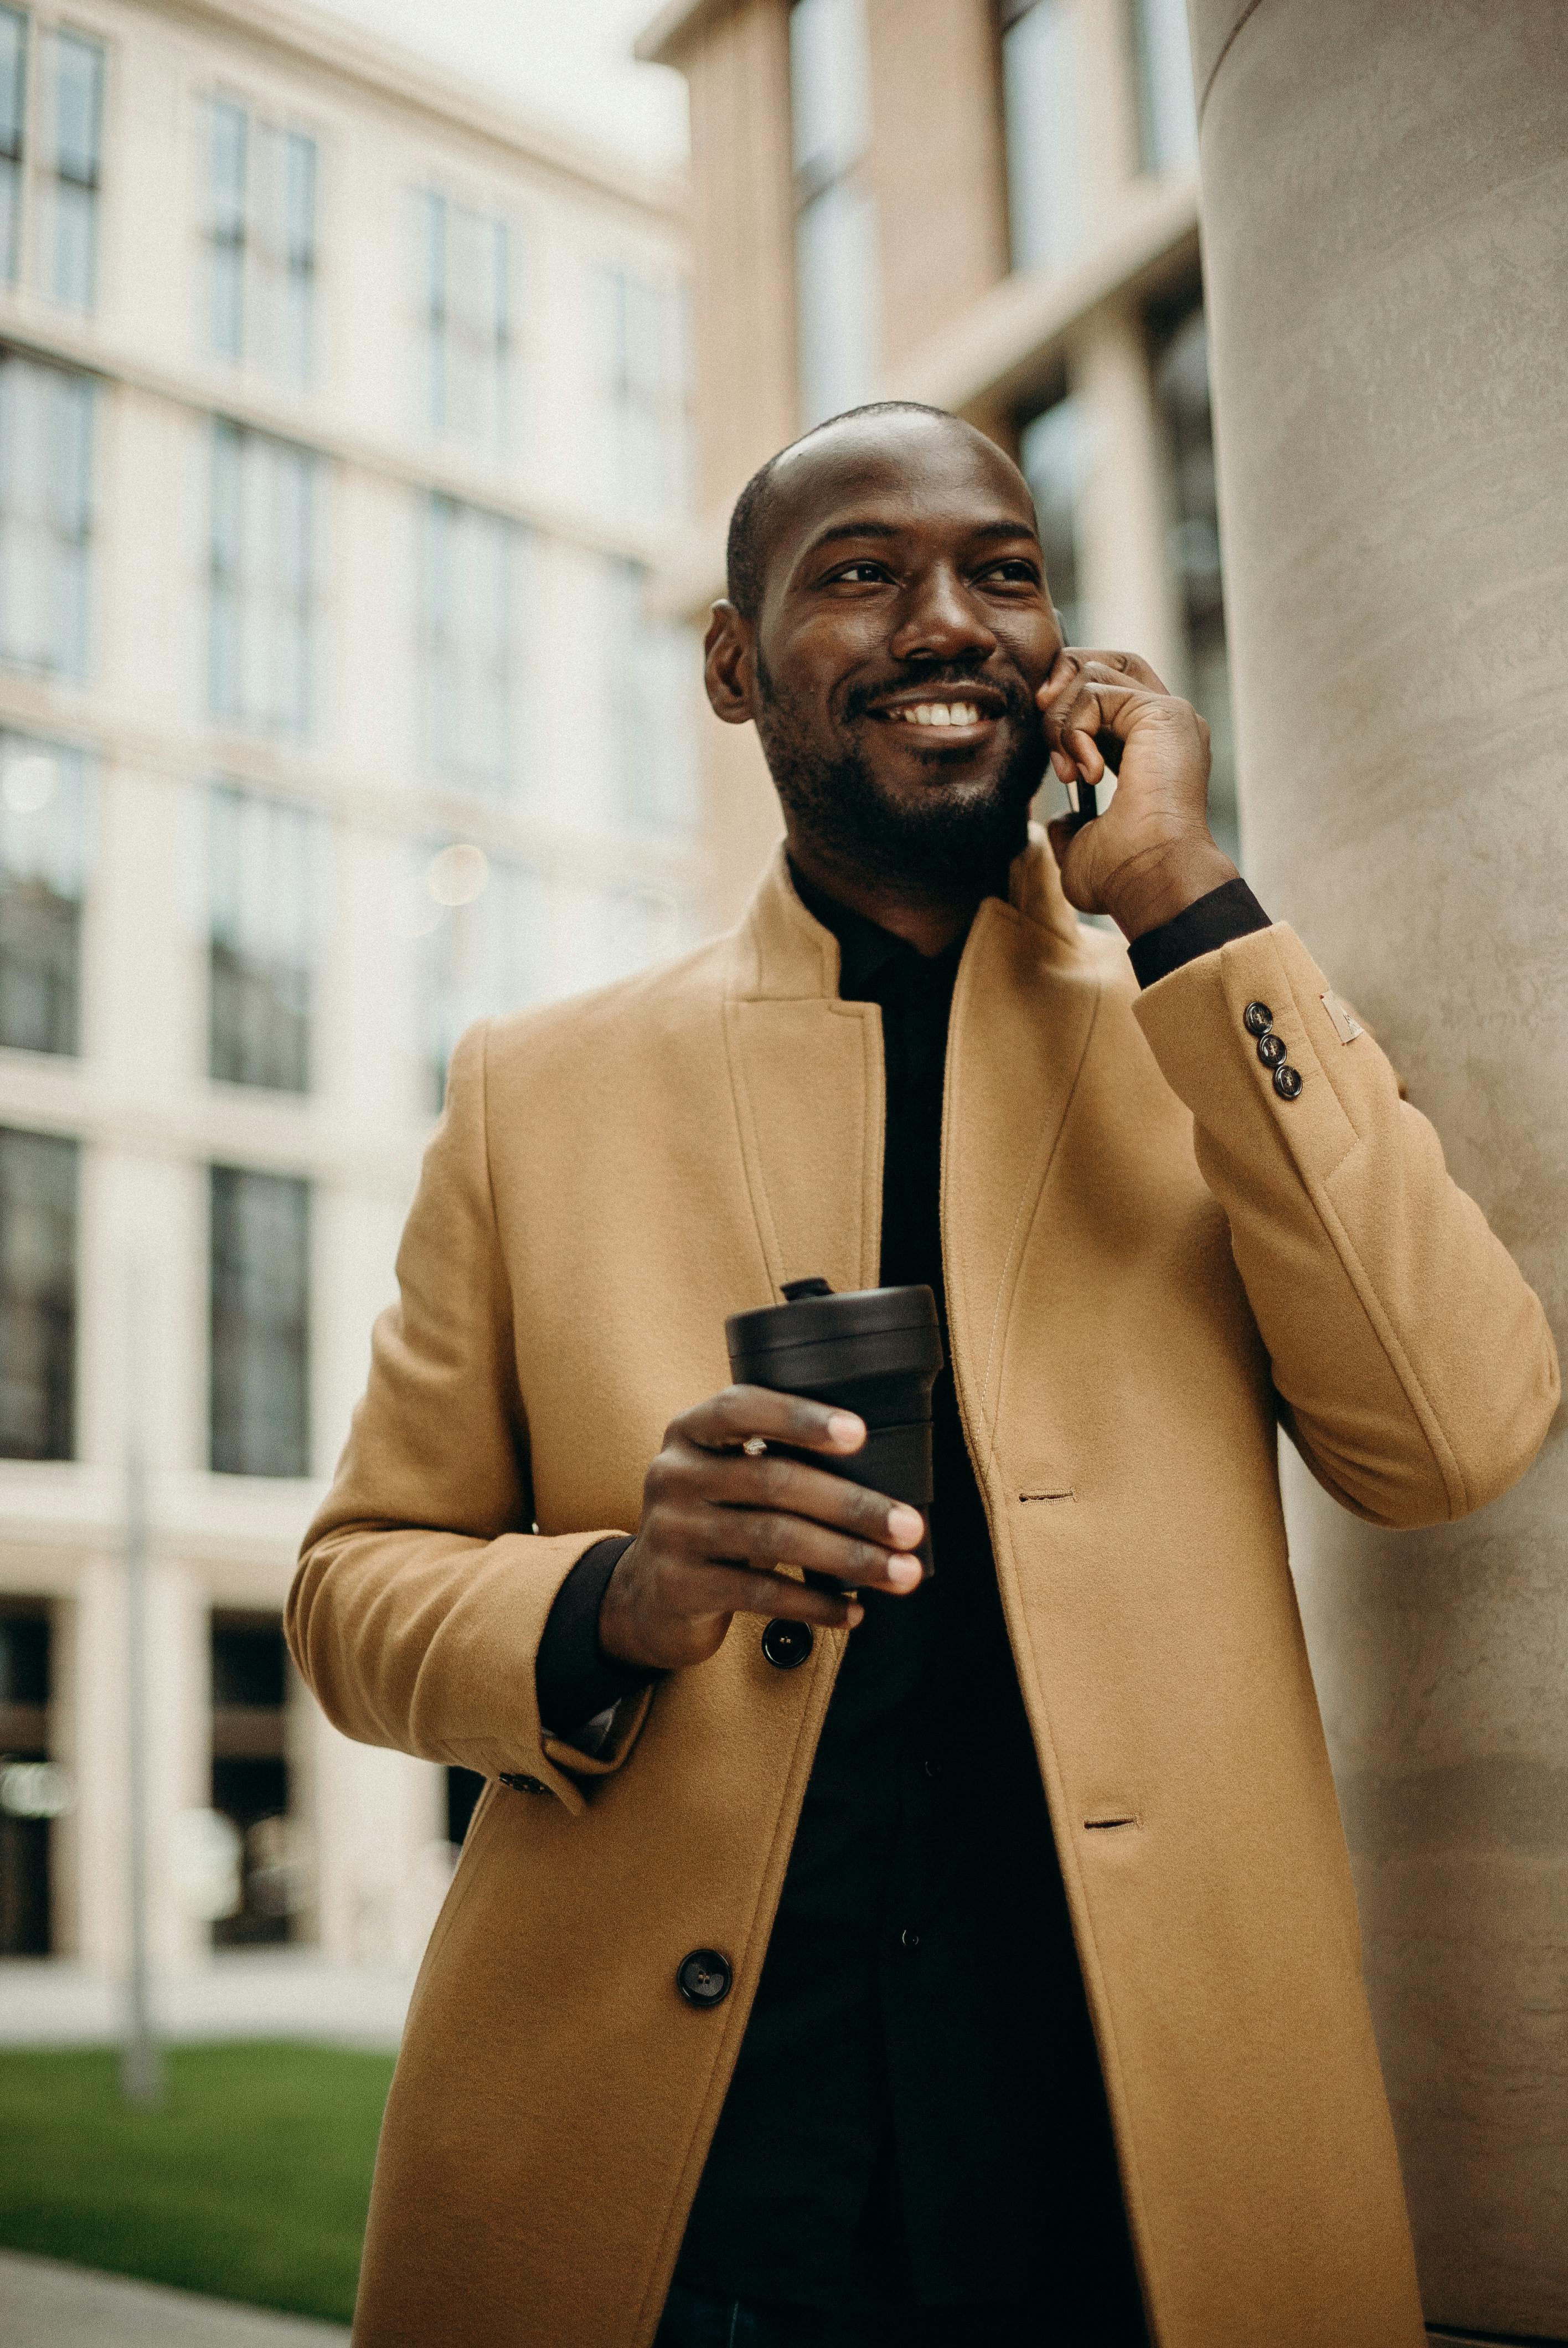 A happy man holding a beverage and talking on the phone | Source: Pexels